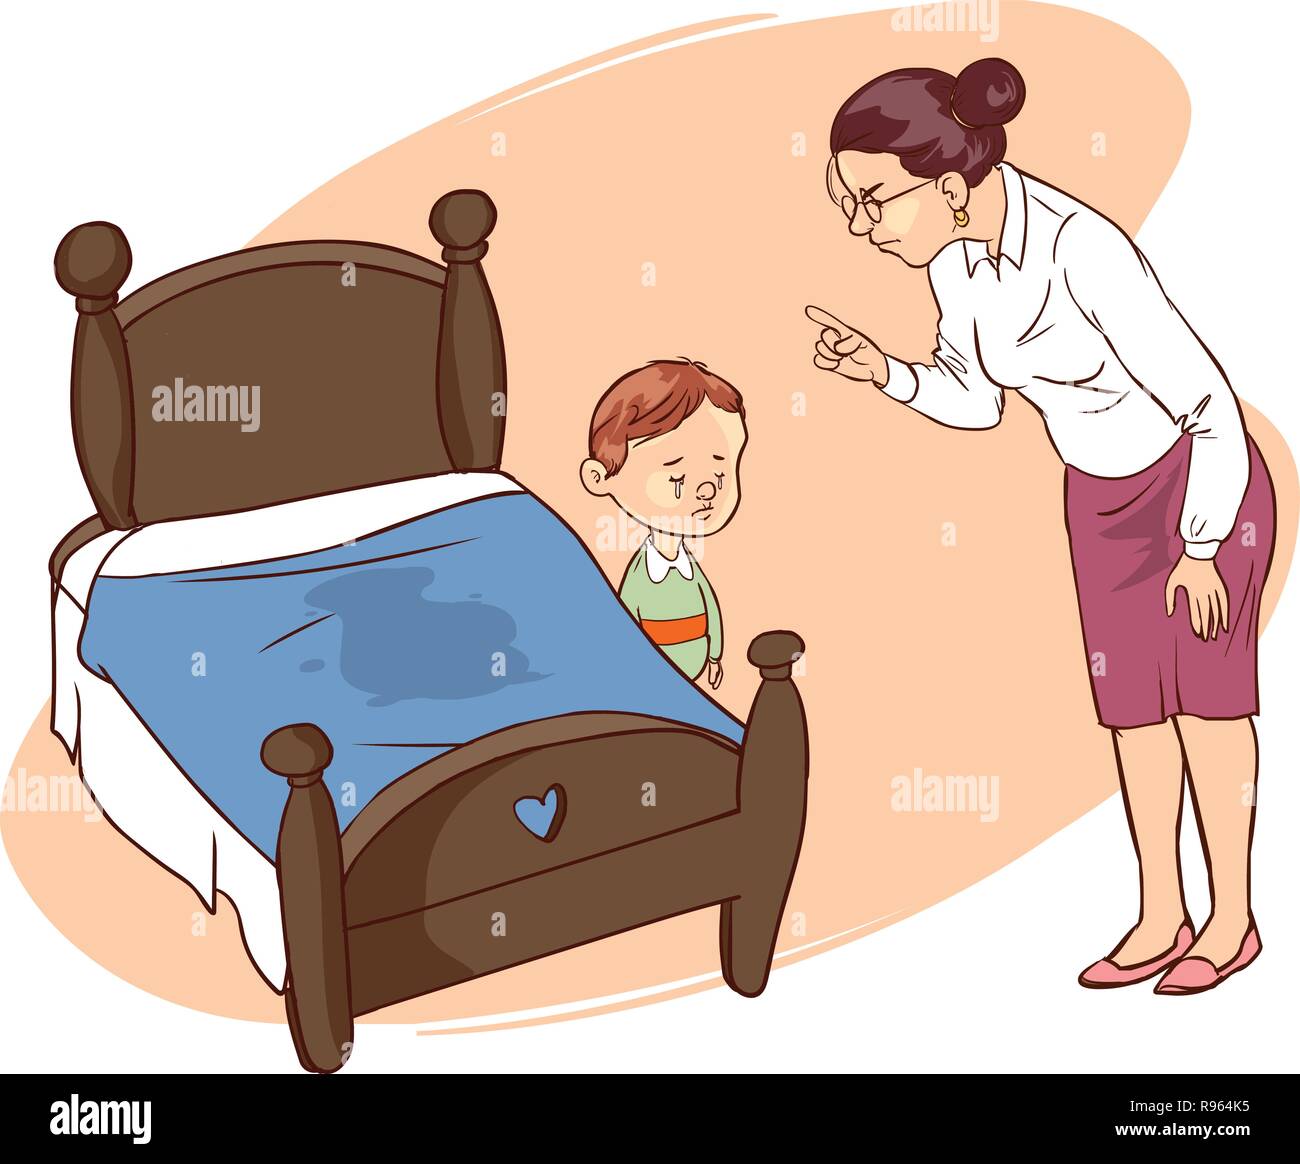 Hand drawn picture of young boy who has wet the bed. Stock Vector